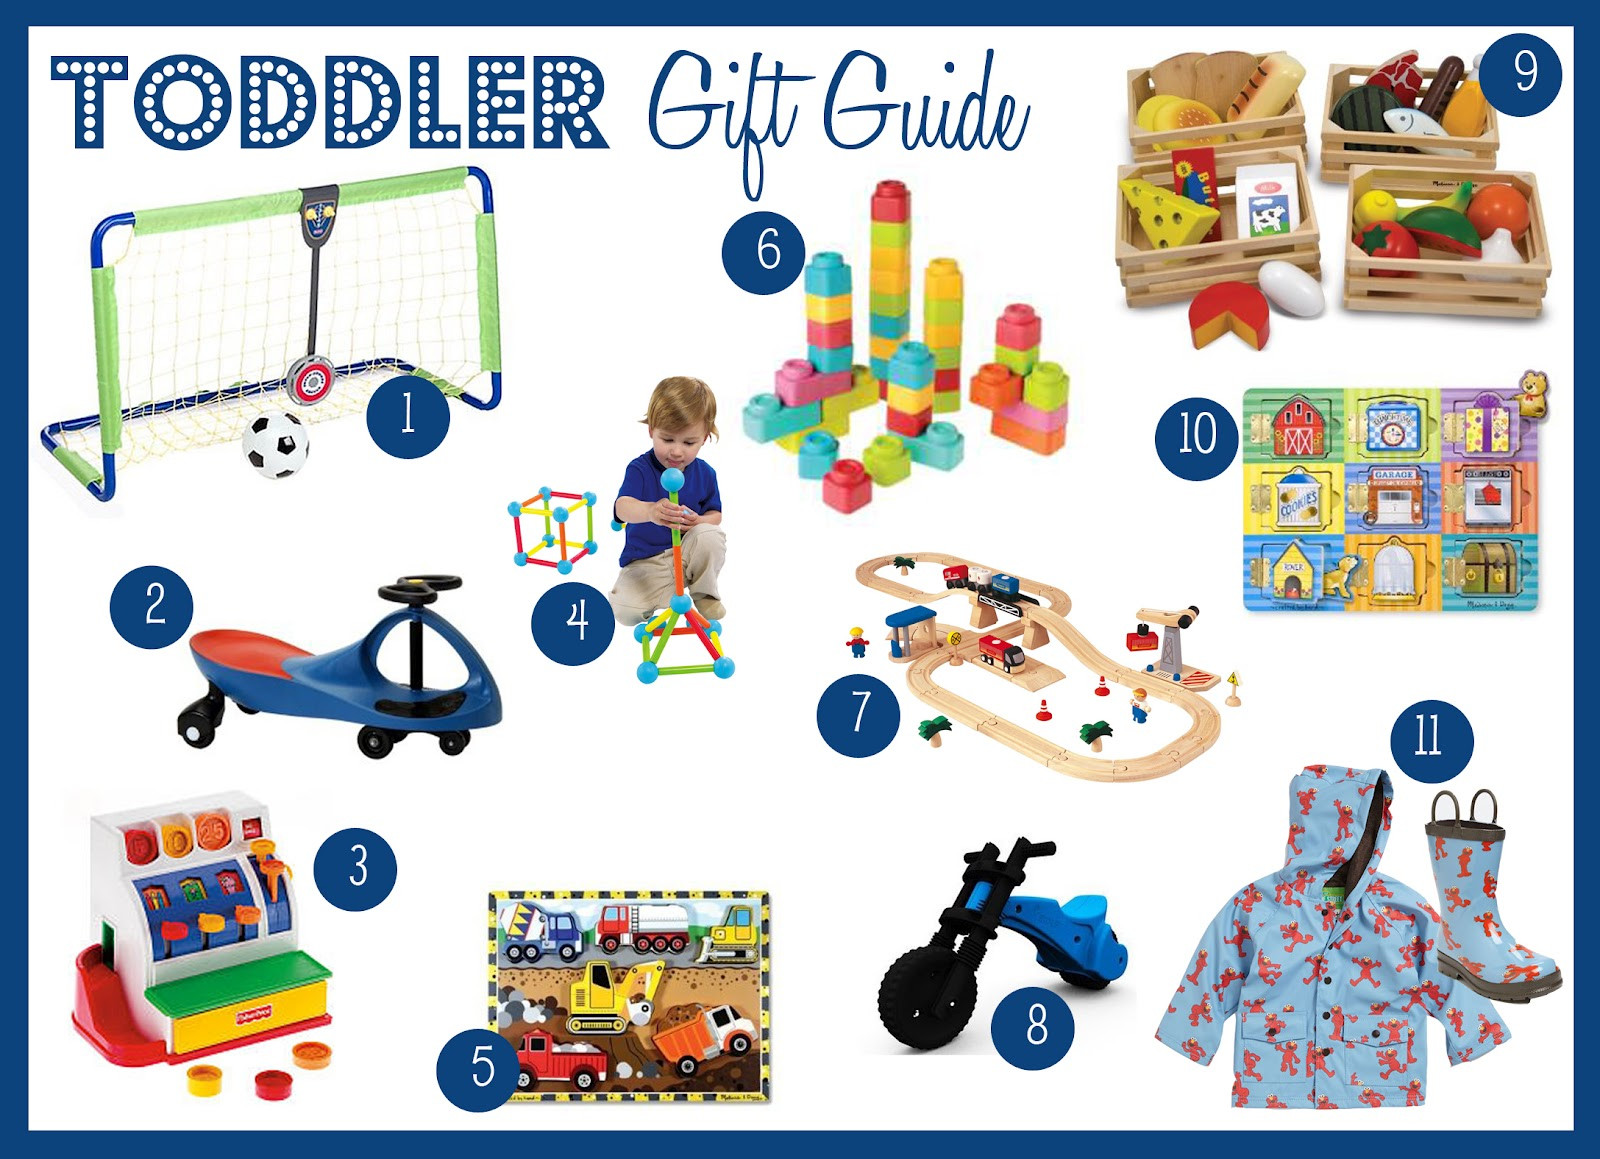 Toddler Boys Gift Ideas
 Daily Dimples Toddler Gift Guide